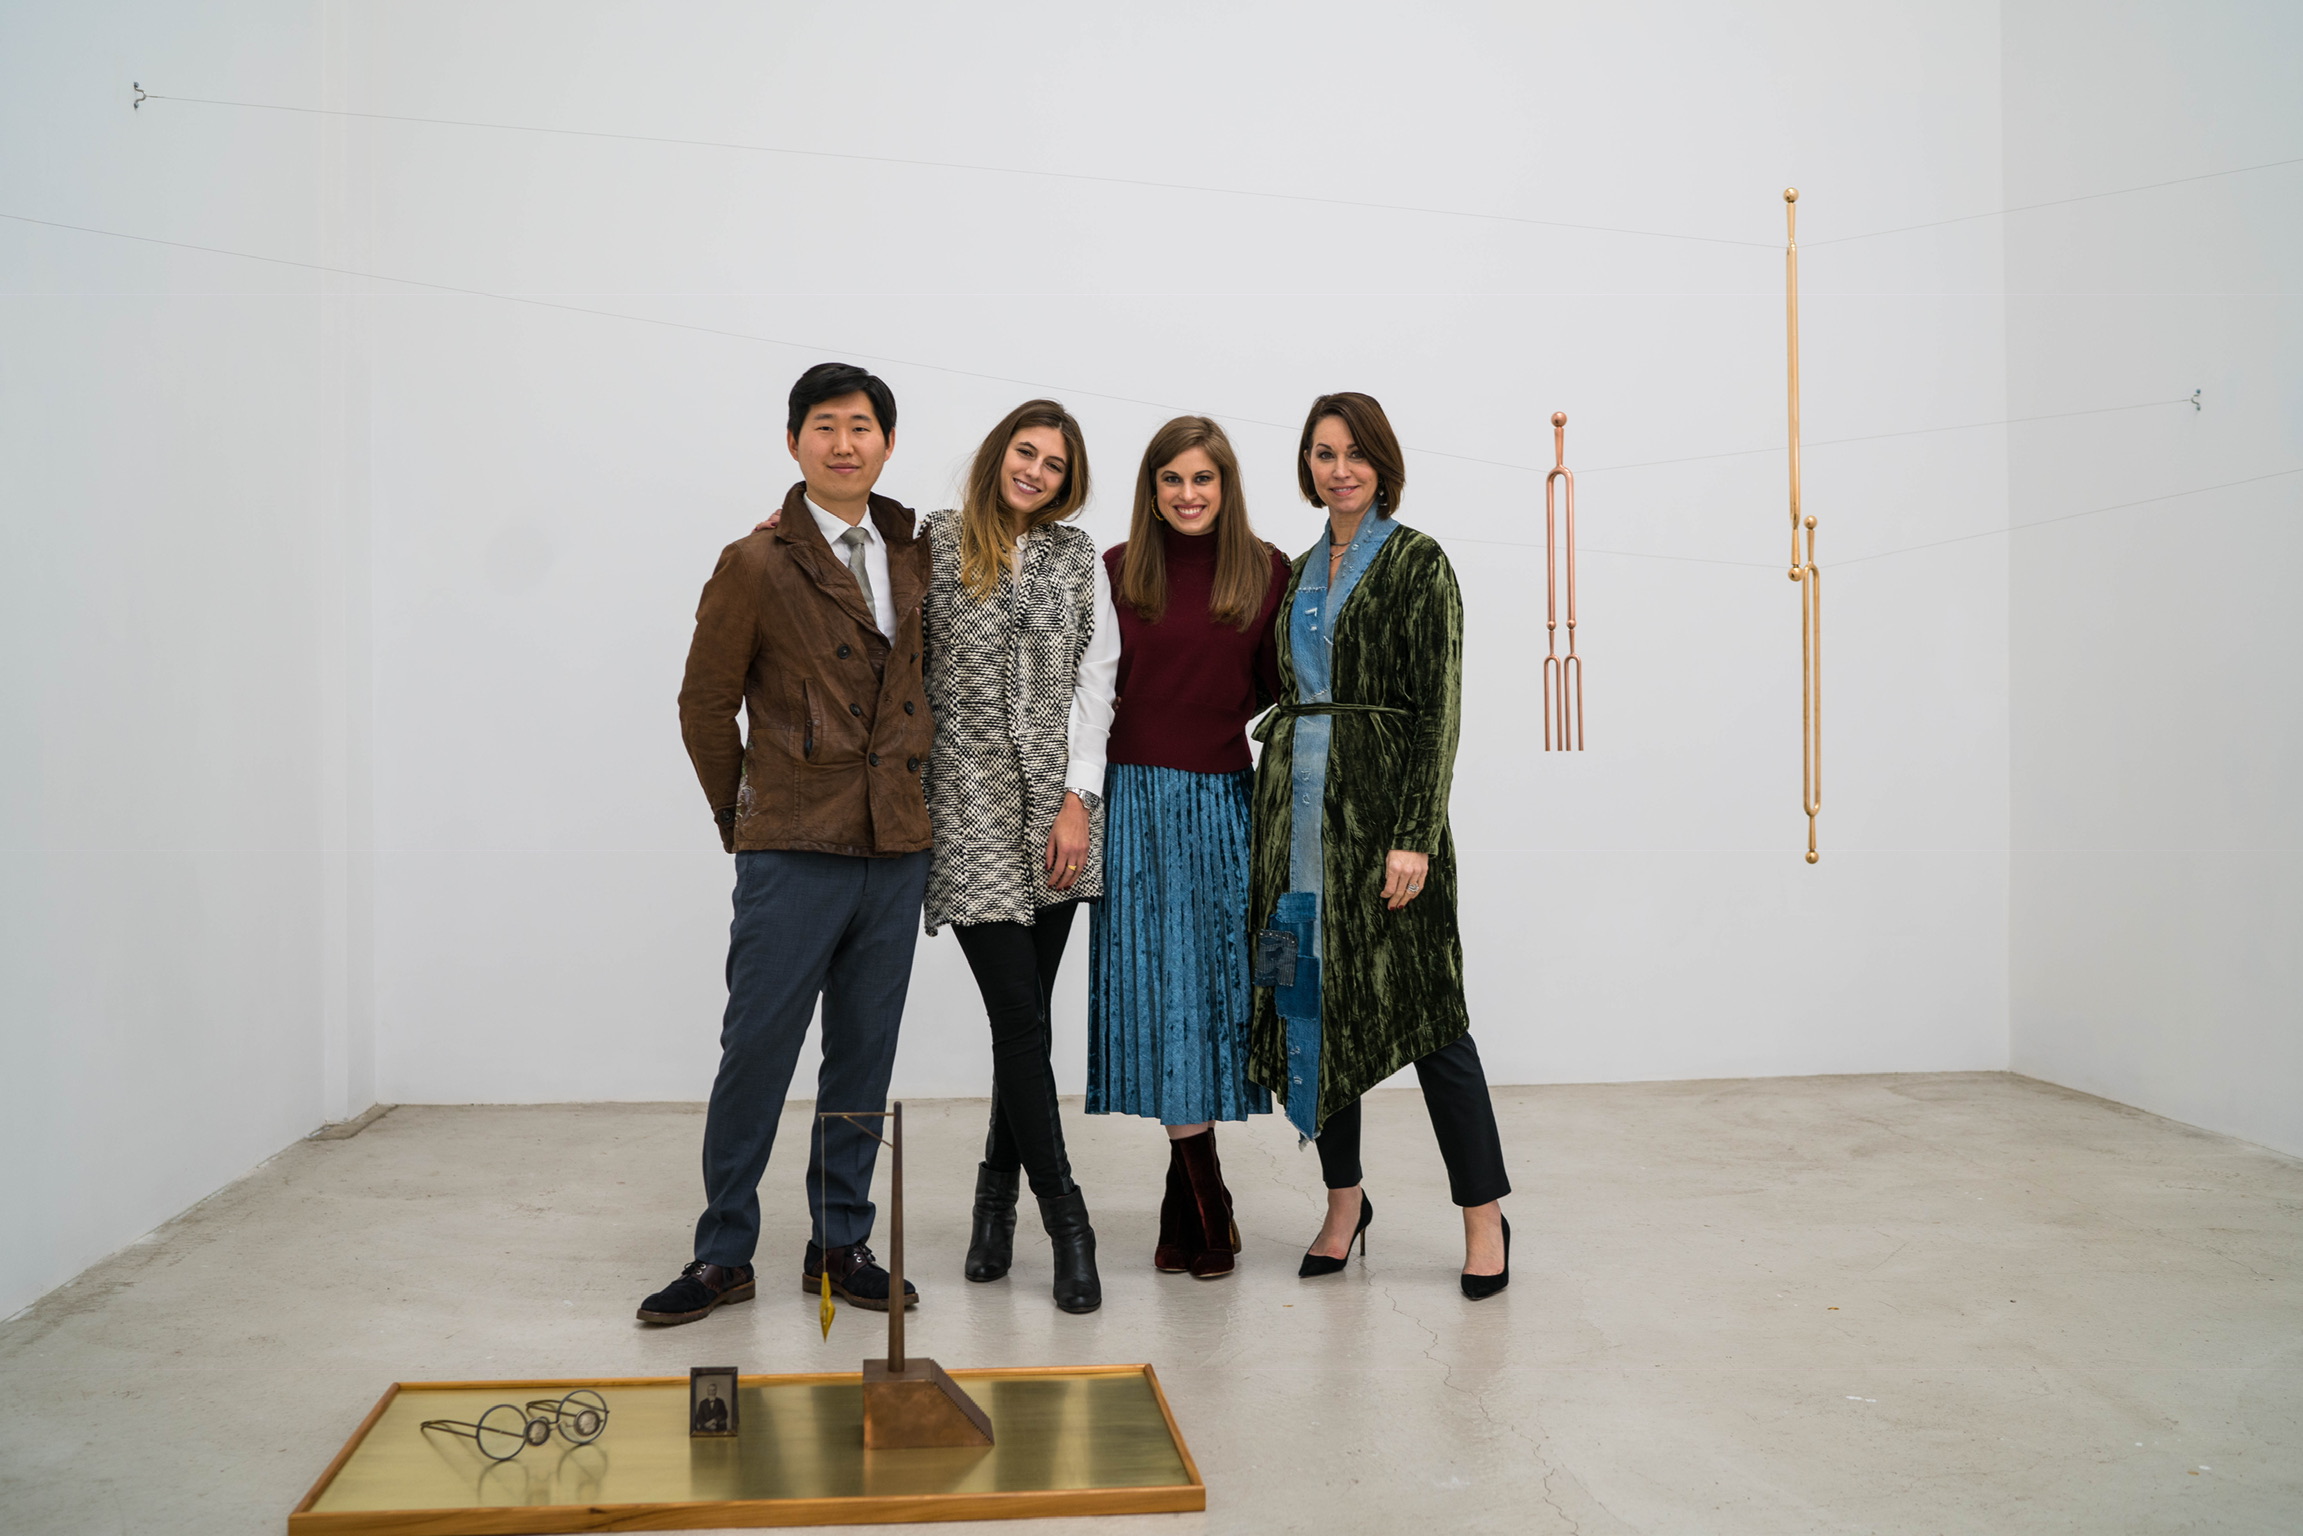 Four people (one man and three women) standing in an art gallery: one wearing a brown jacket, blue pants and brown shoes, one wearing a scarf and jeans, one wearing a crimson sweater and blue skirt, the last wearing a green velvet robe coat with denim on it and black pumps.